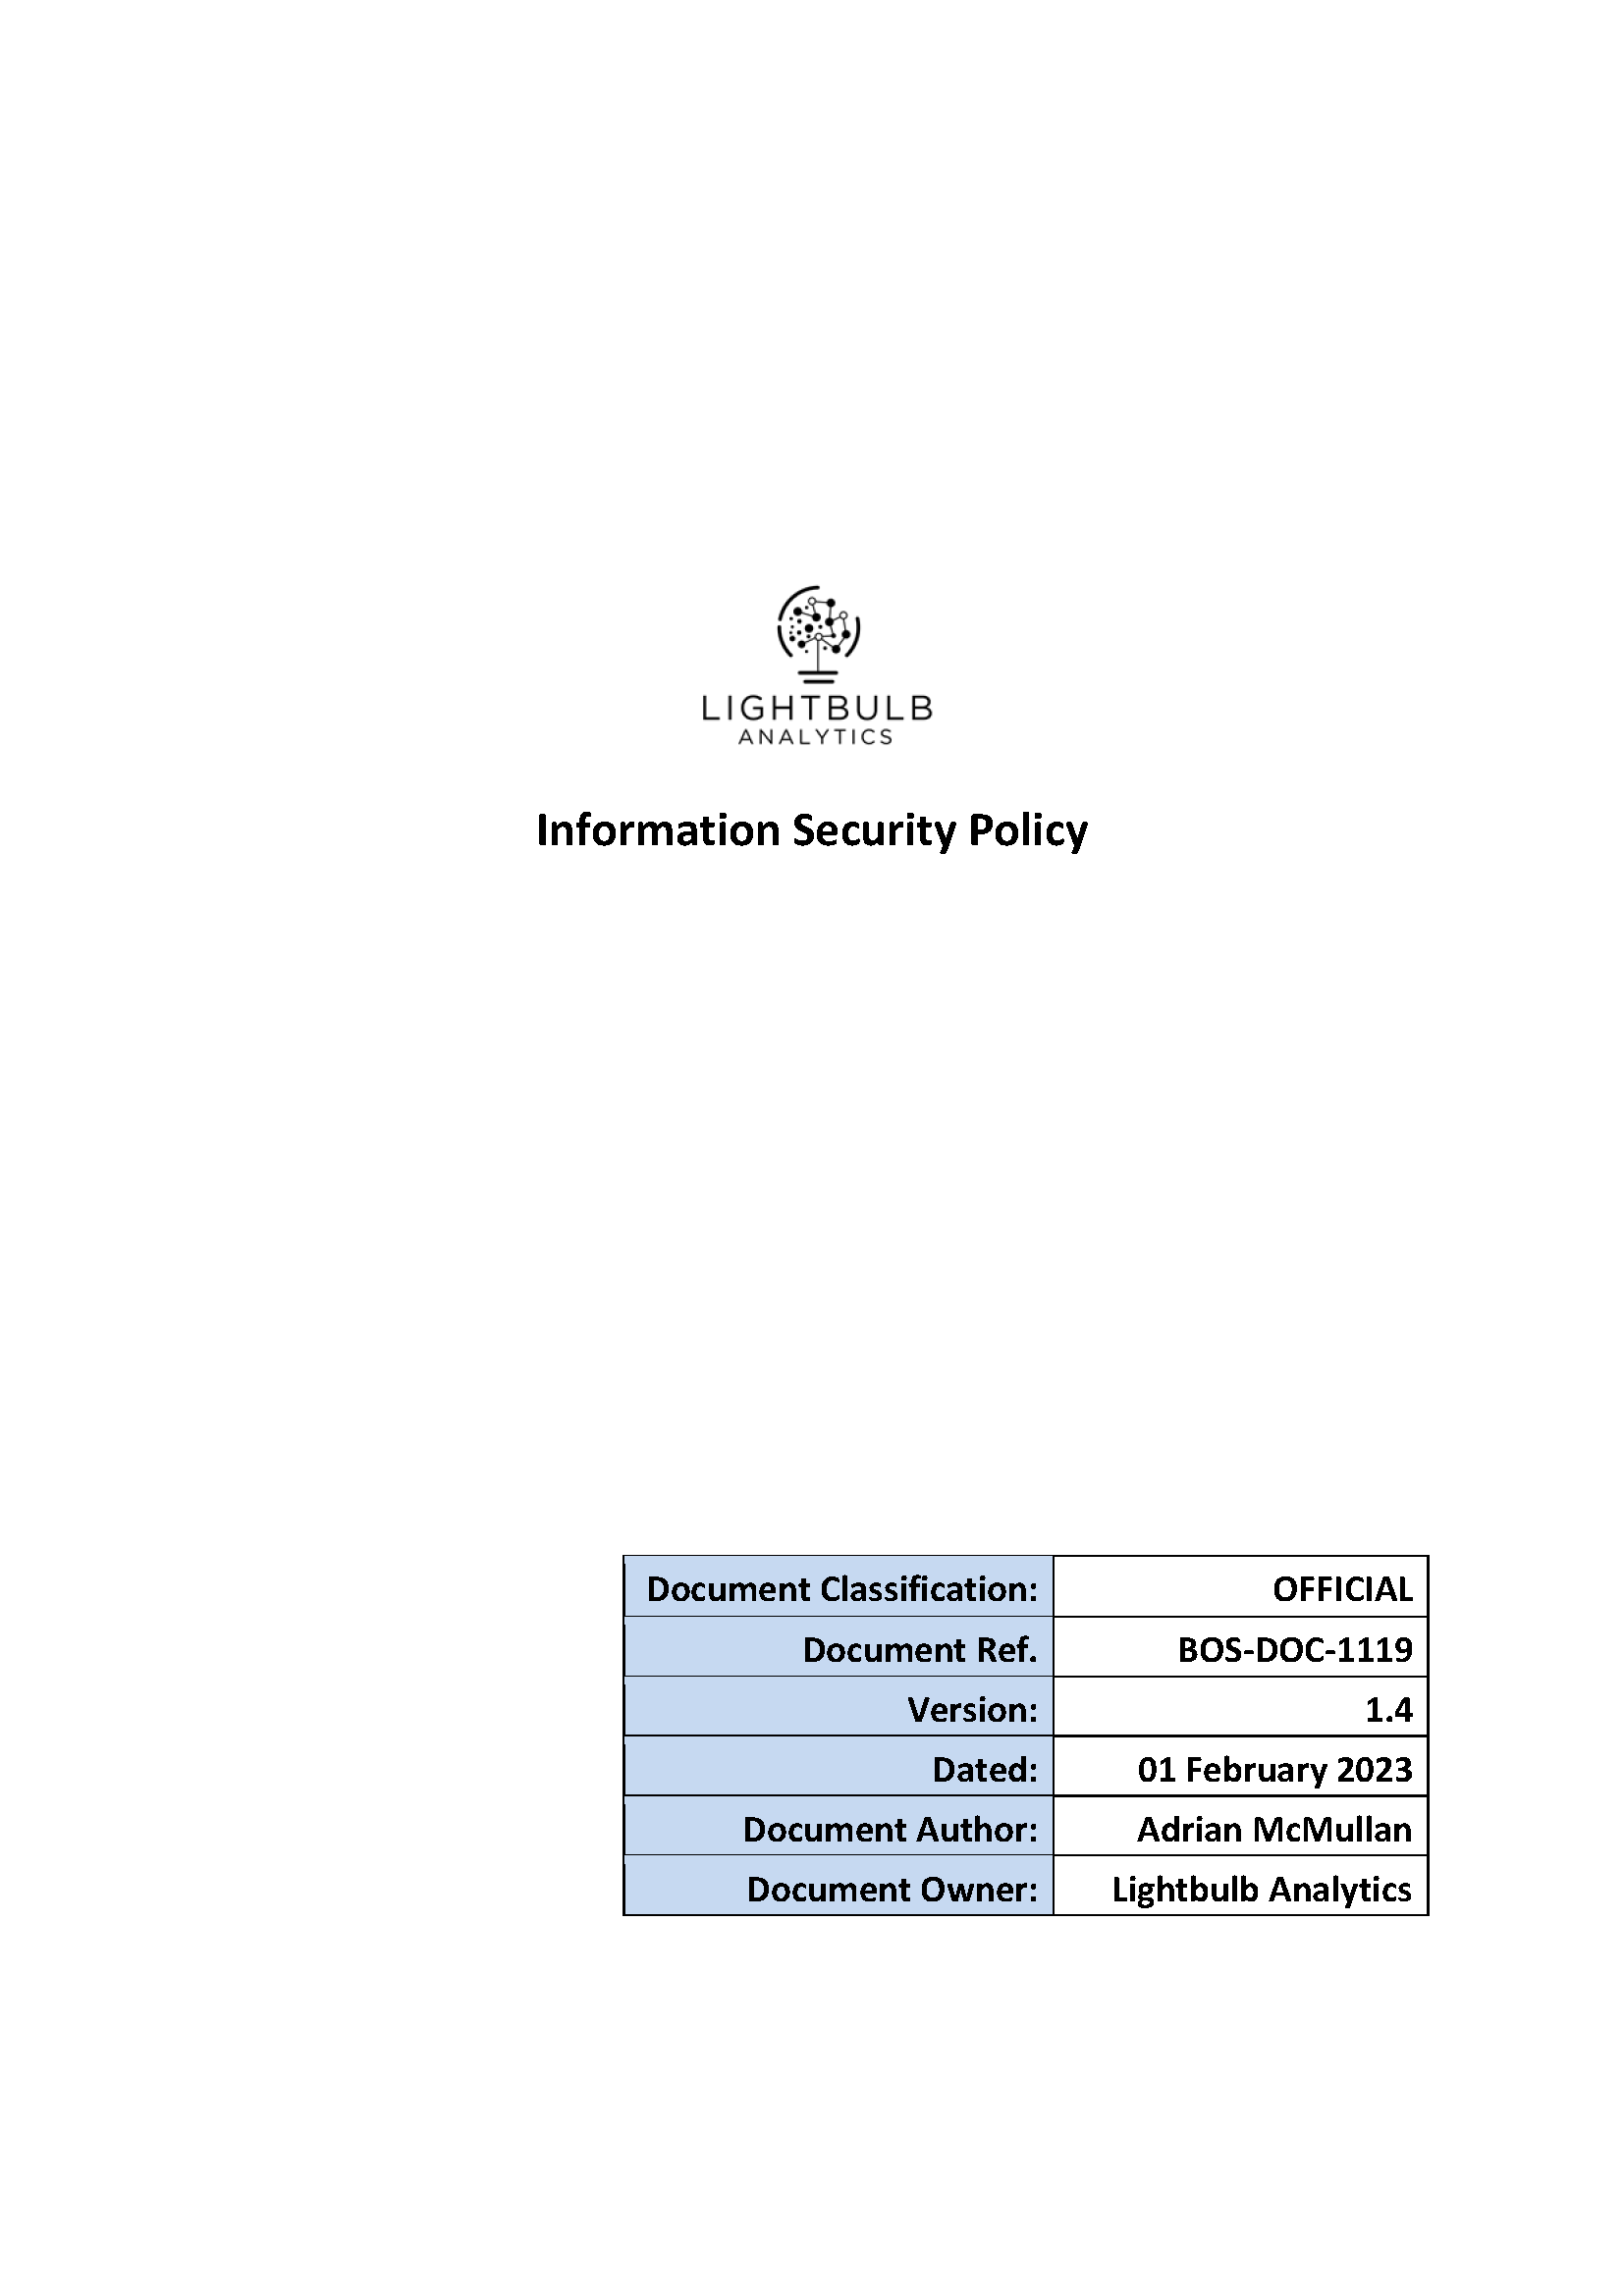 ISMS-DOC-05-4 Information Security Policy v1.4